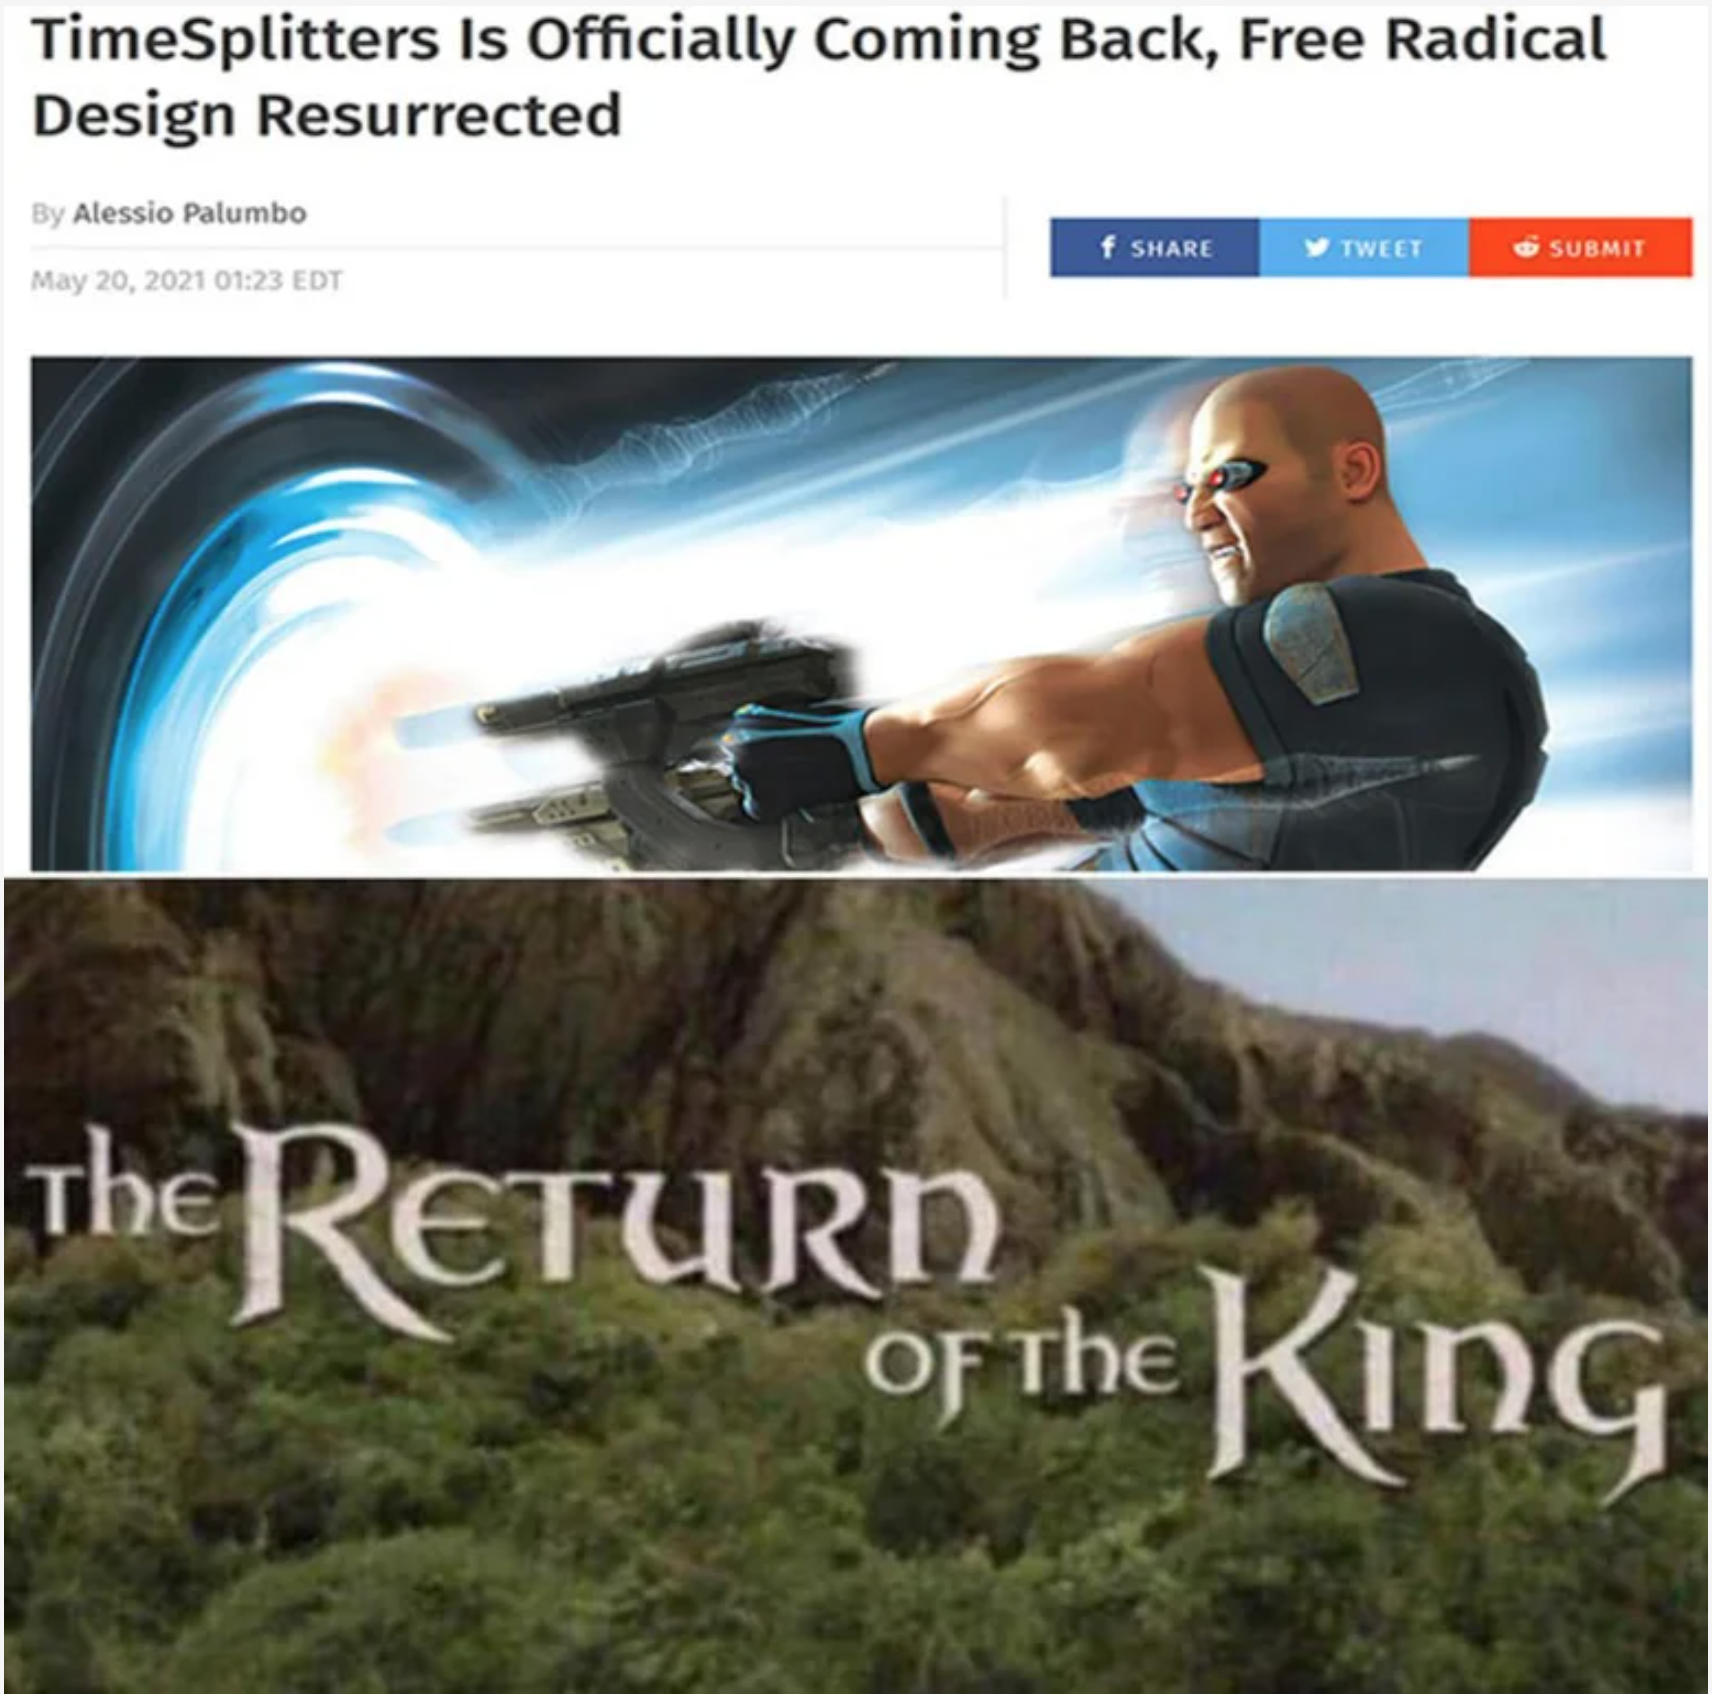 funny gaming memes - careful he's a hero meme - TimeSplitters Is Officially Coming Back, Free Radical Design Resurrected by Alessio Palumbo 0123 Tweet The Return Of The King